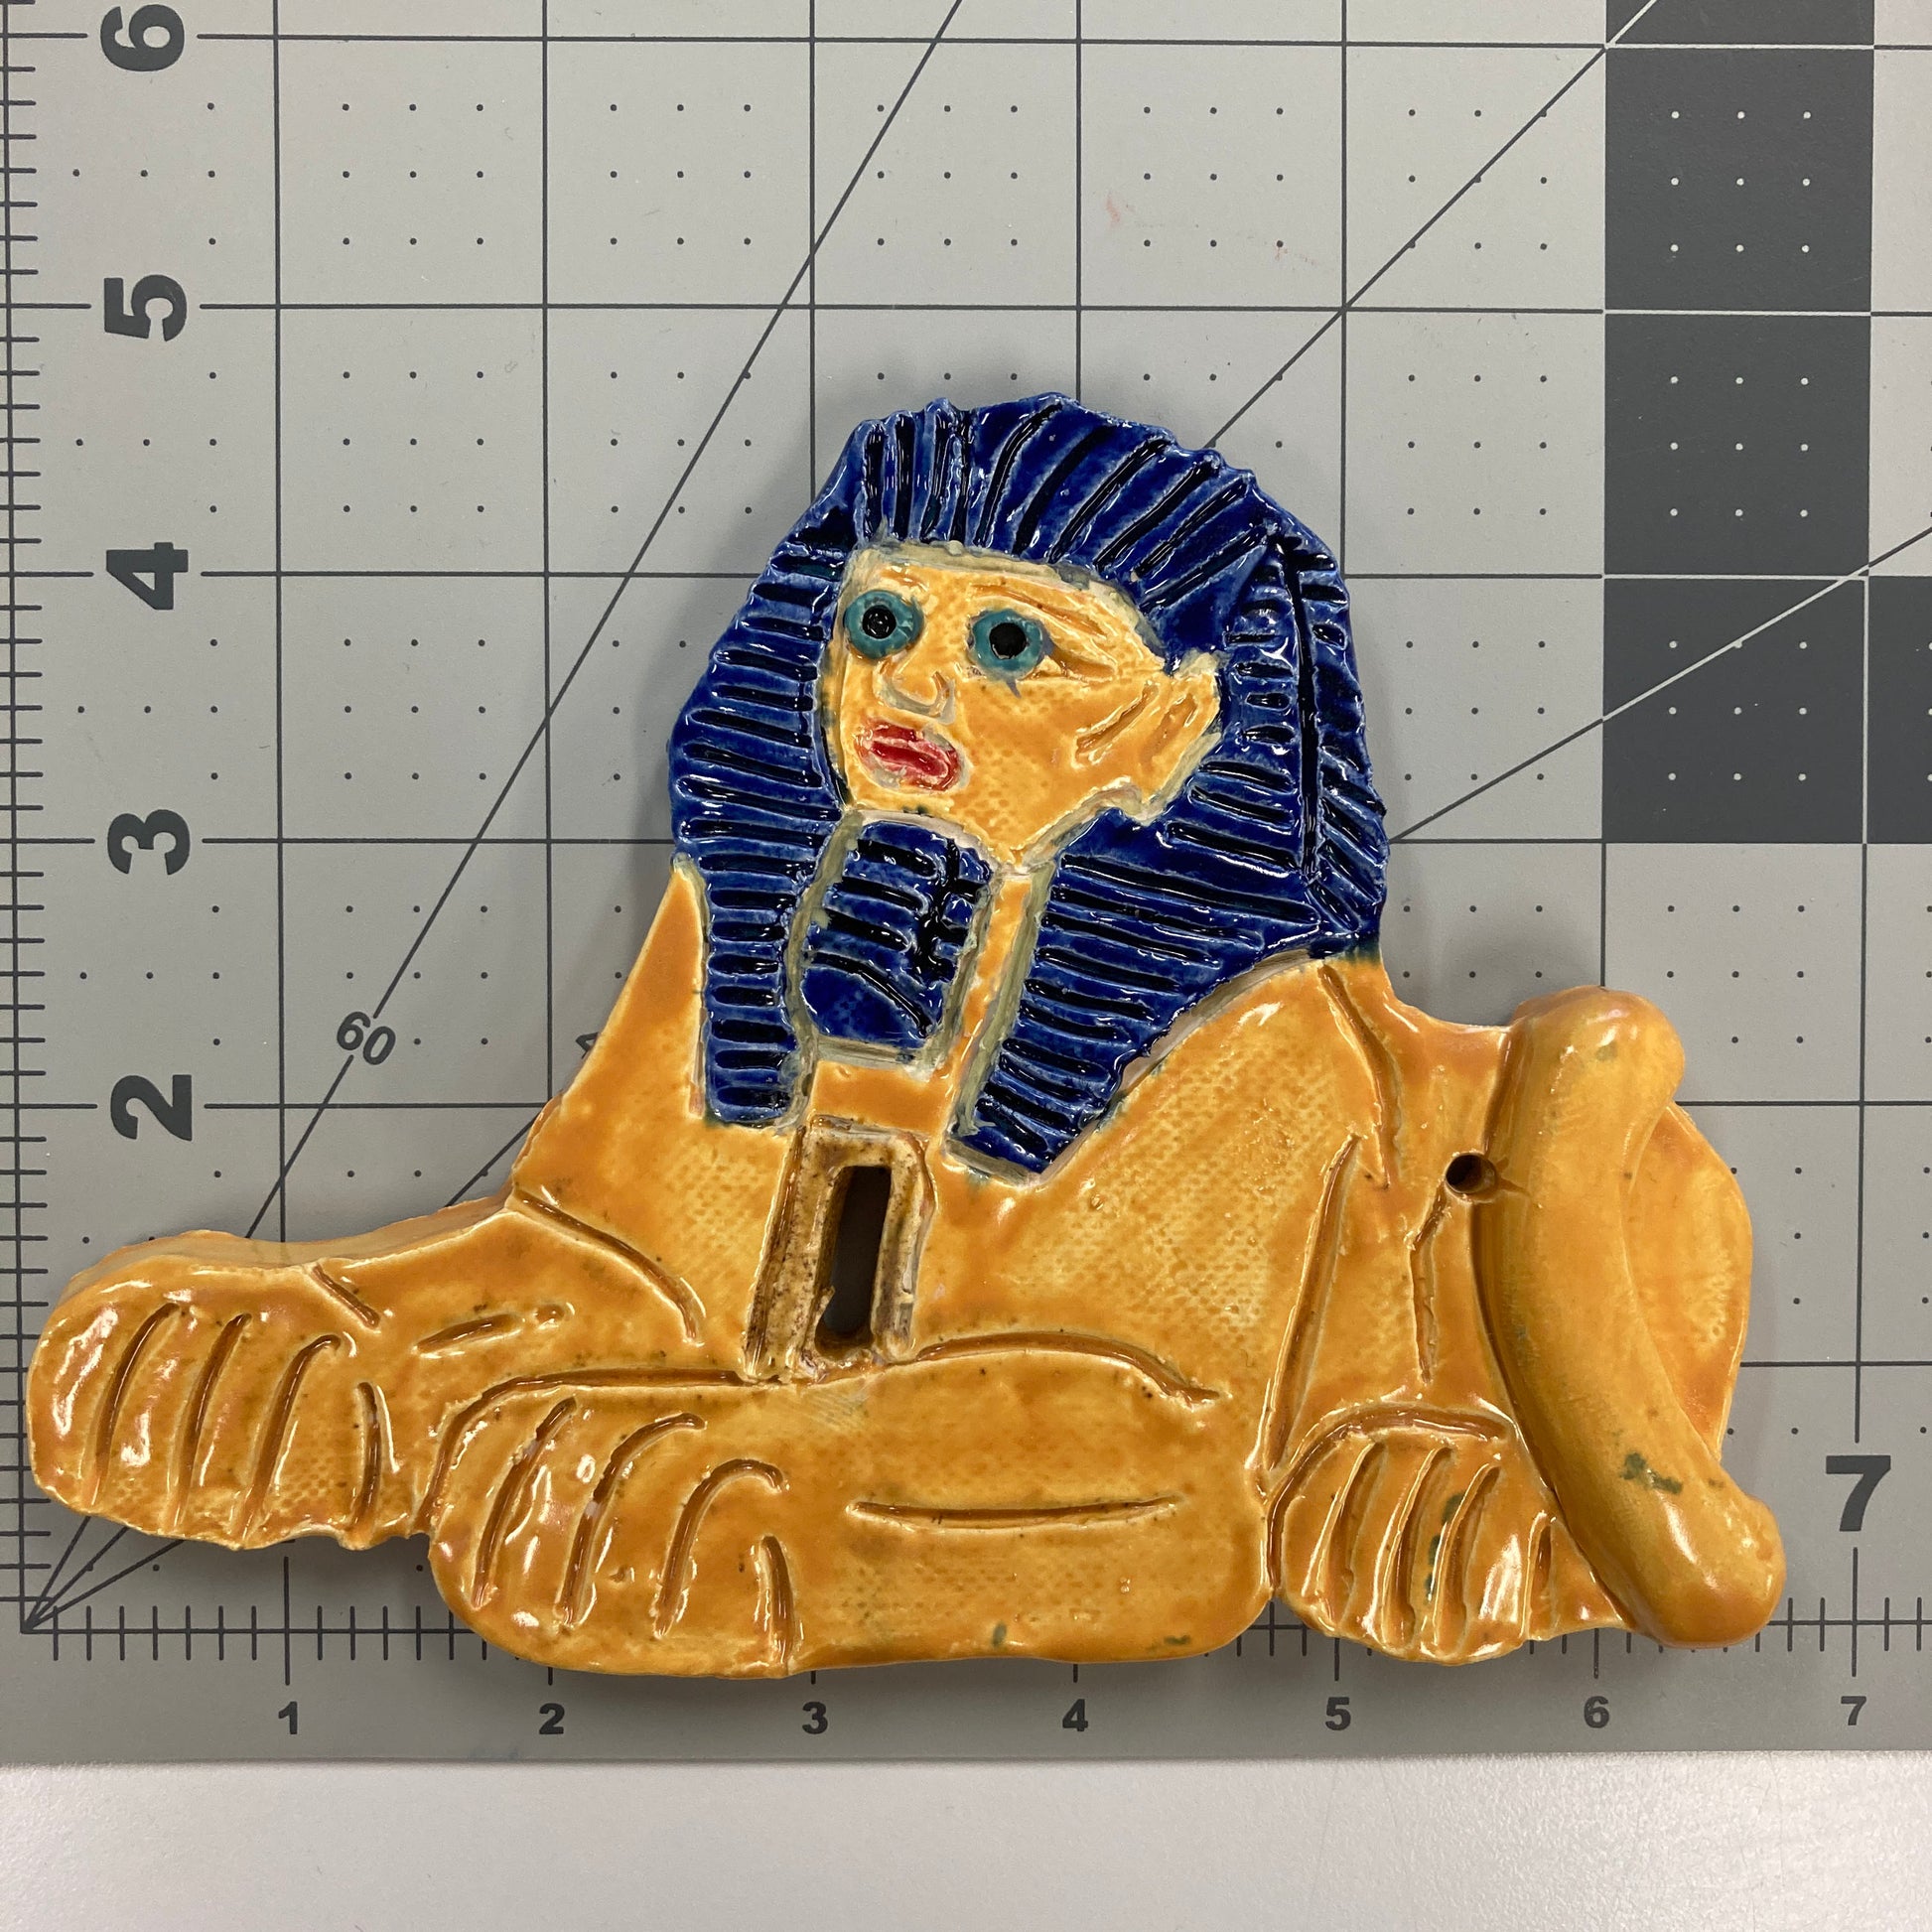 WATCH Resources Art Guild - Ceramic Arts Handmade Clay Crafts 7-inch x 4.5-inch Glazed Sphinx made by Lisa Uptain